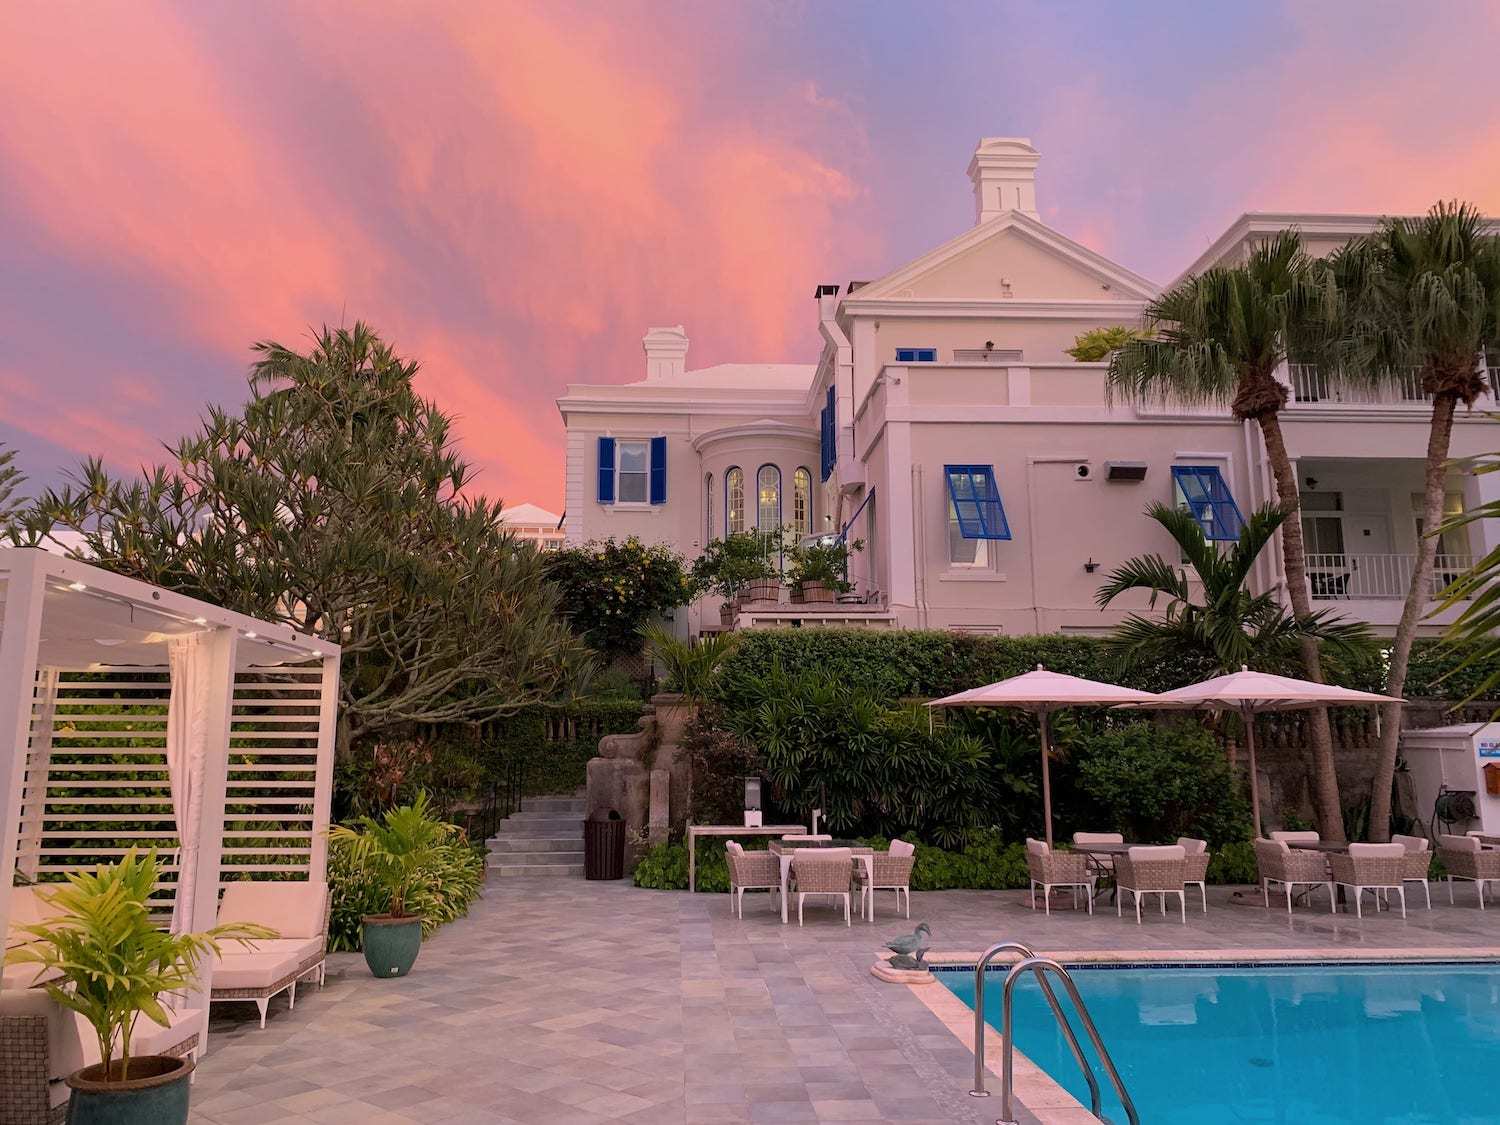 Where to stay in Bermuda